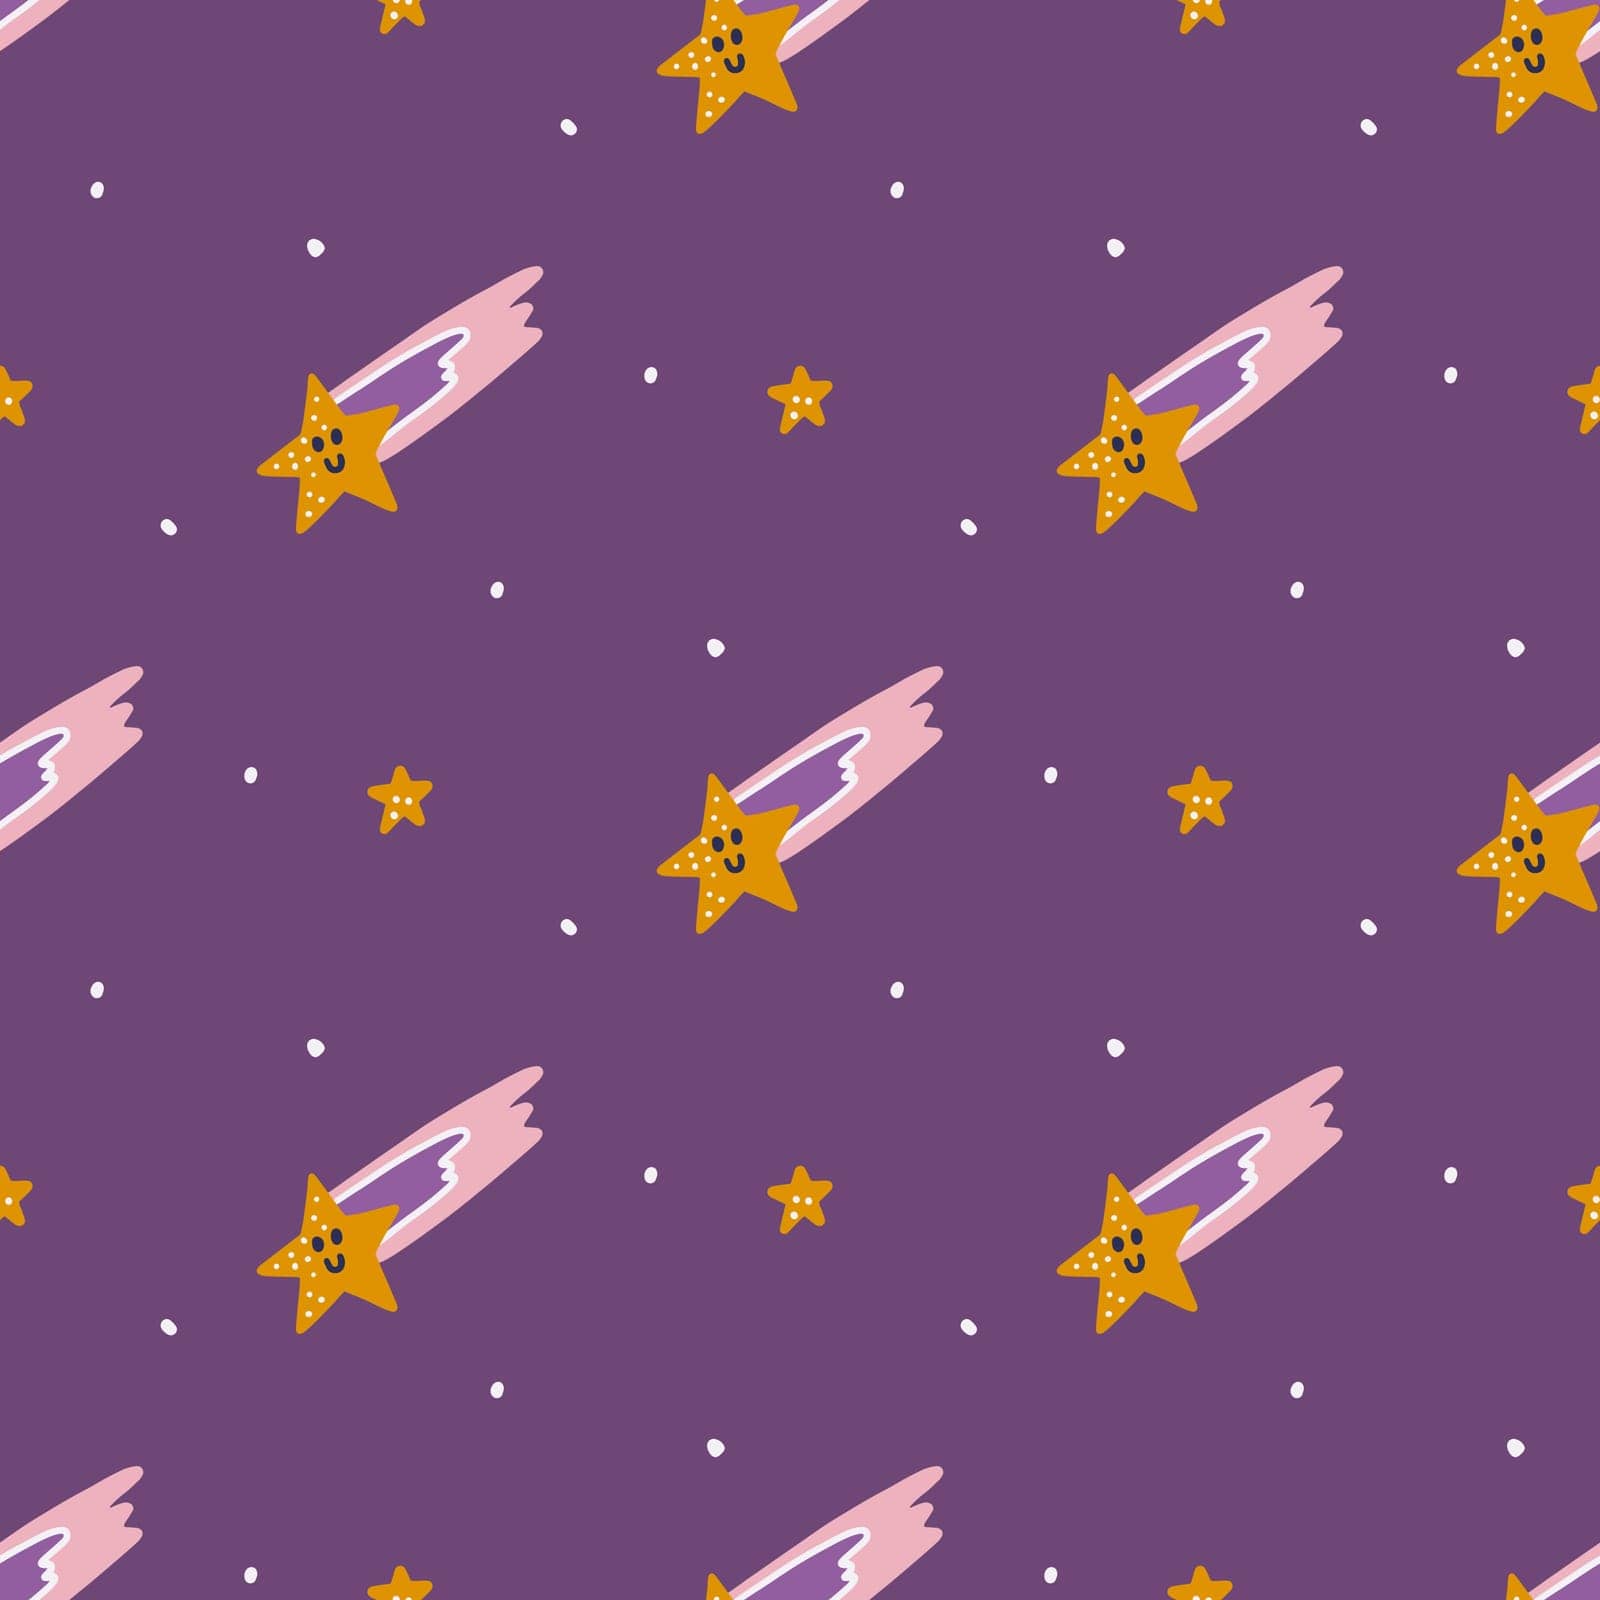 Cute cartoon stars on purple background, vector seamless pattern, children's print for fabric, paper products by vetriciya_art